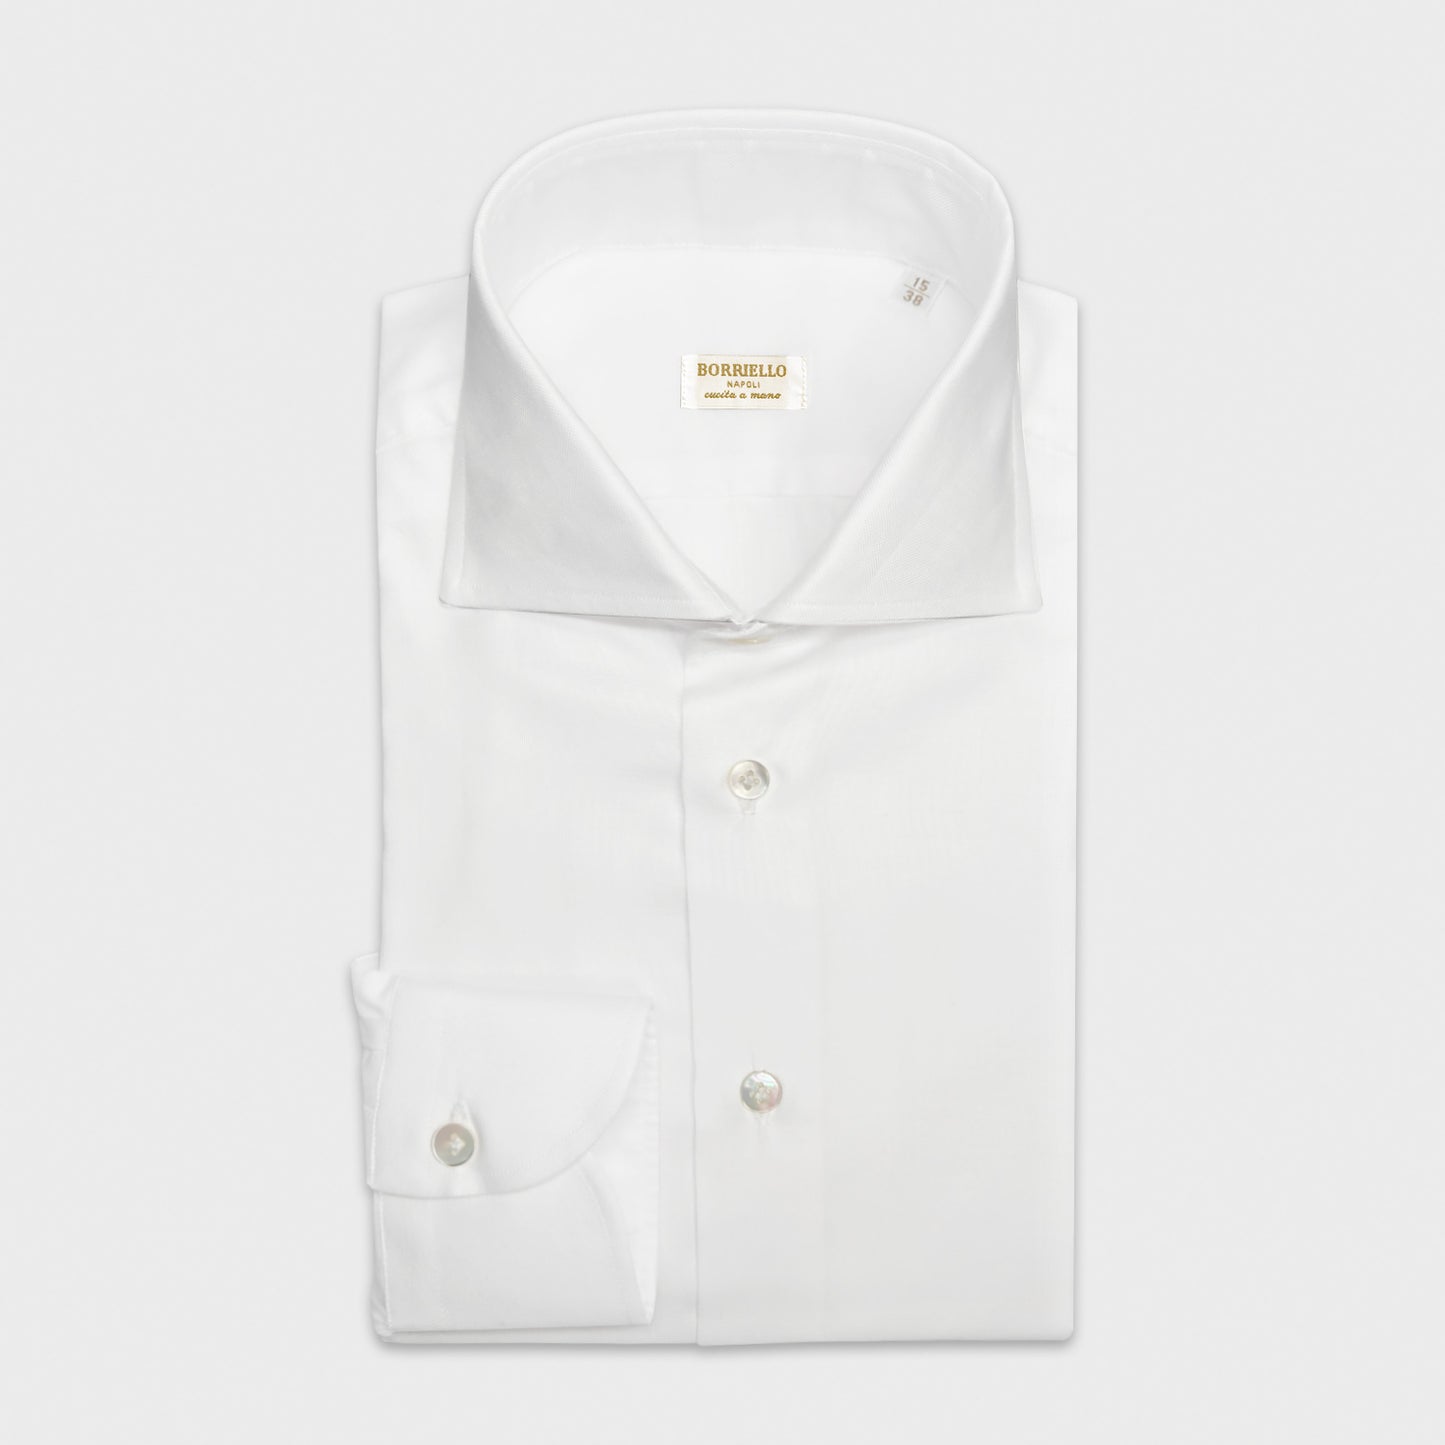 White Oxford Cotton Shirt Borriello Napoli. Classic handmade shirt ideal for the office and for more formal occasions, made in soft and refined oxford cotton double twisted, white formal shirt, handmade buttonholes, mother of pearl buttons.